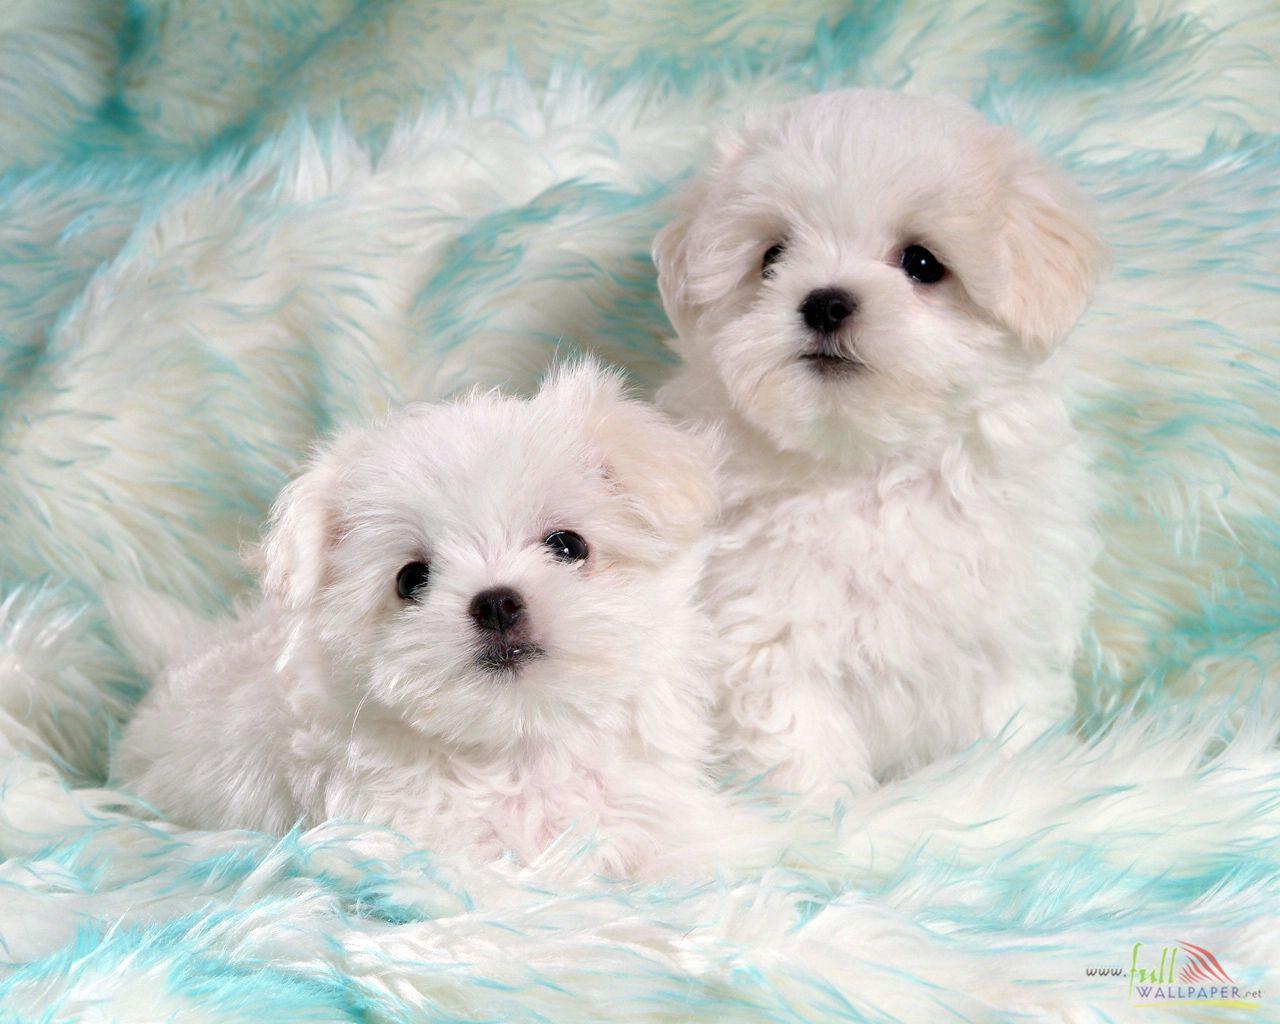 Cute Baby Puppy Wallpapers - Top Free Cute Baby Puppy Backgrounds